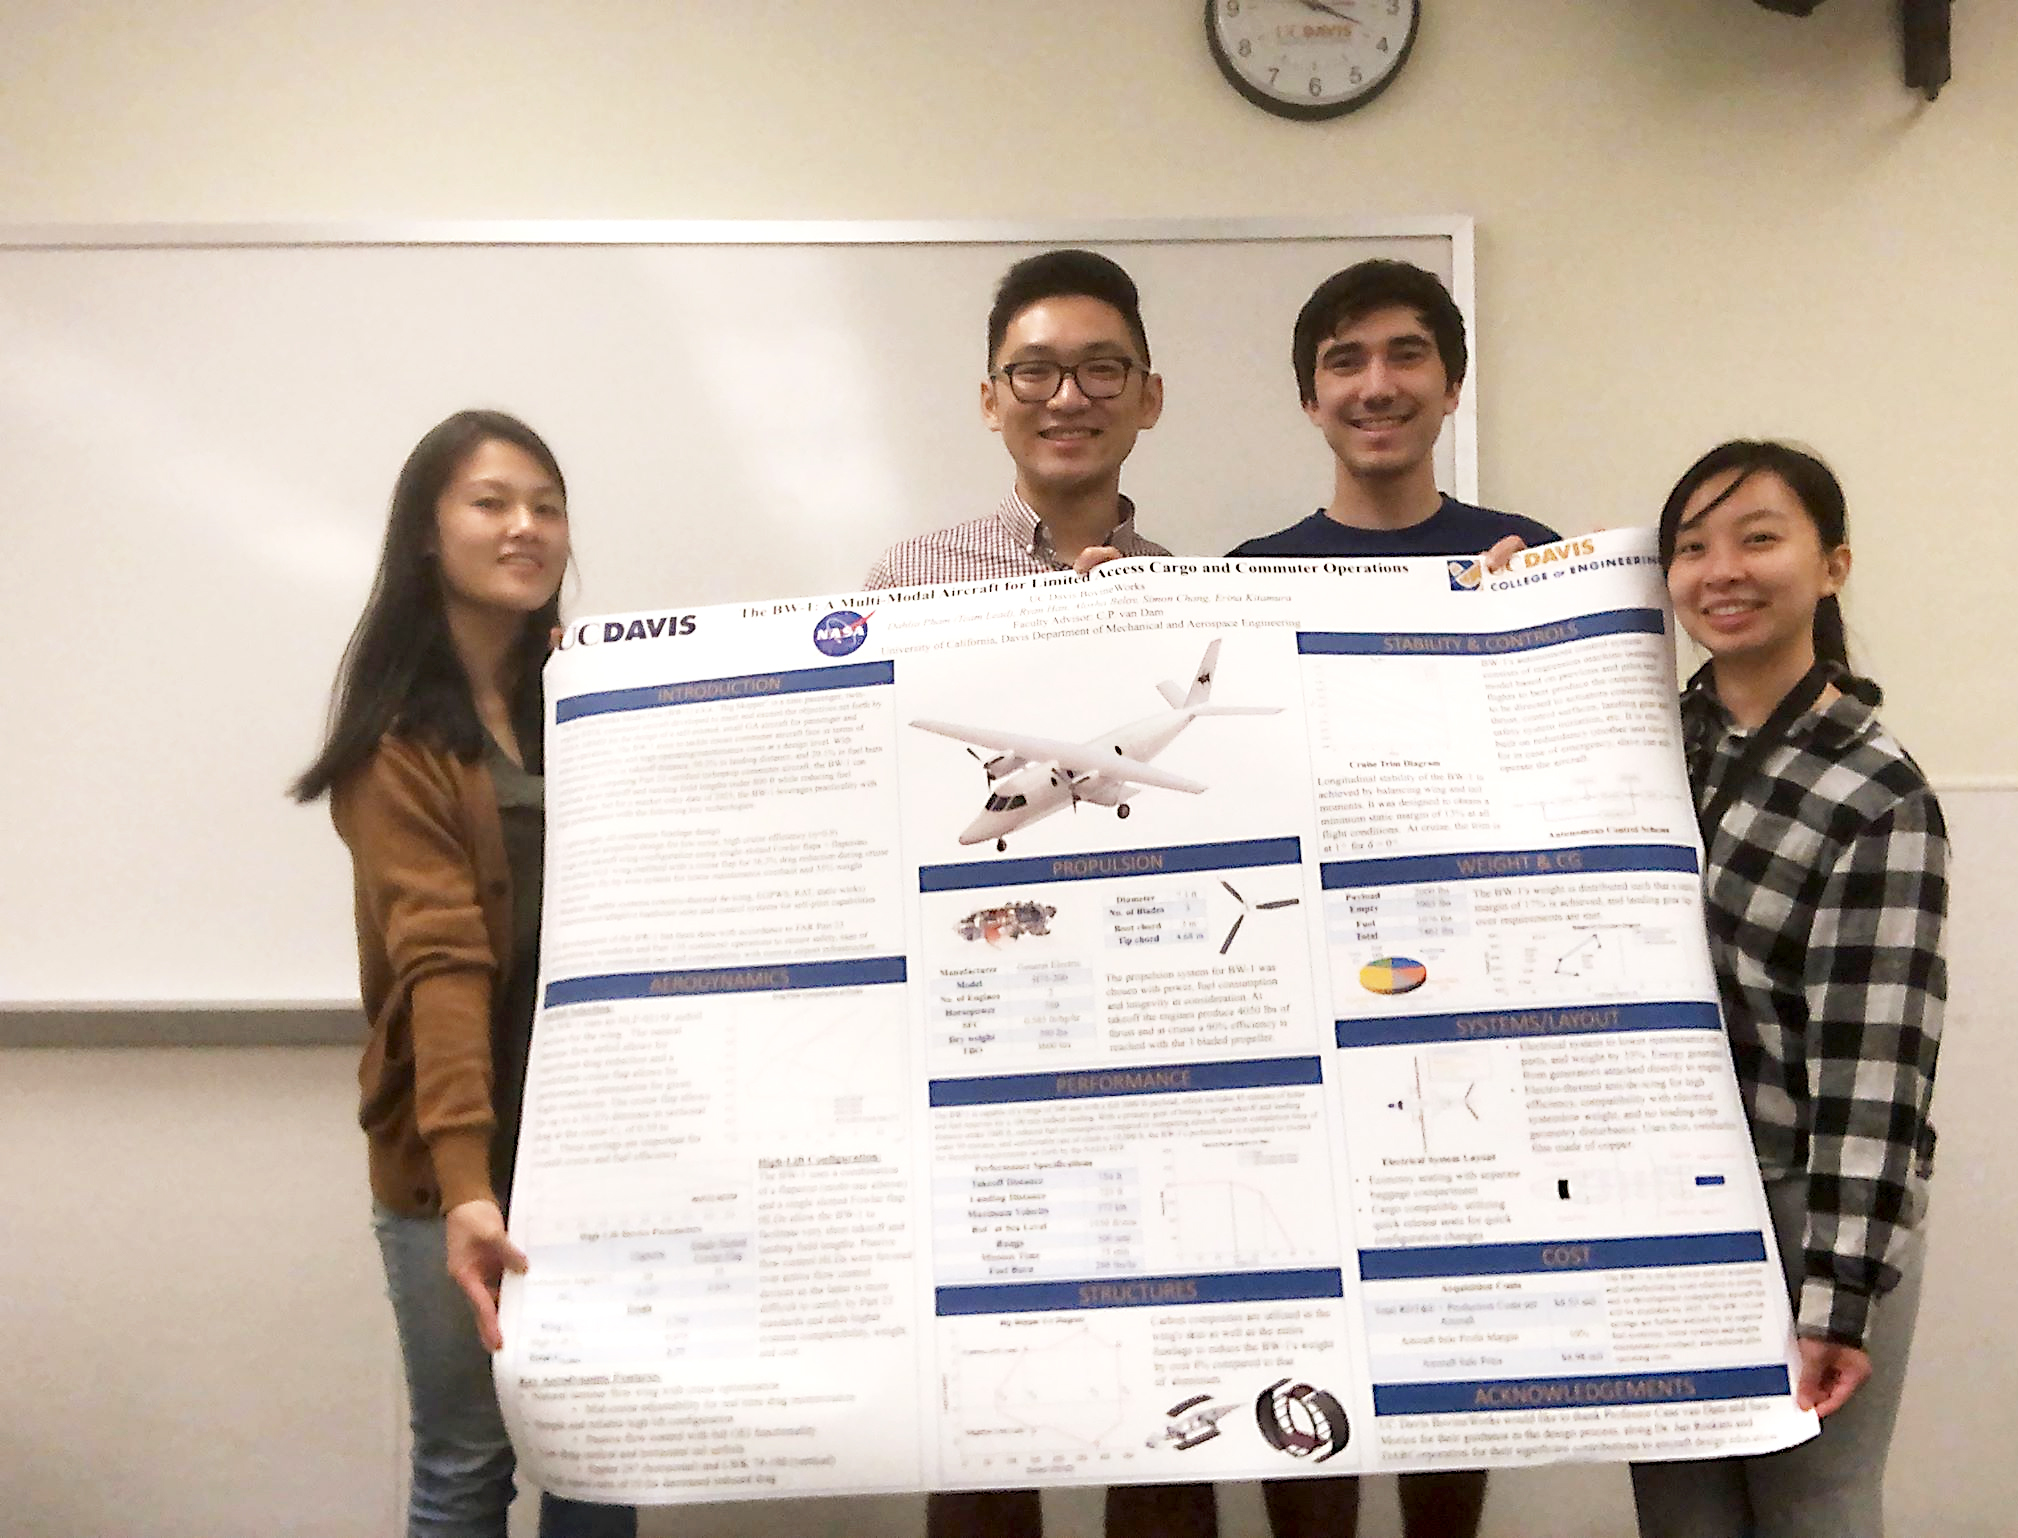 BW-1 Team holding a large print-out.